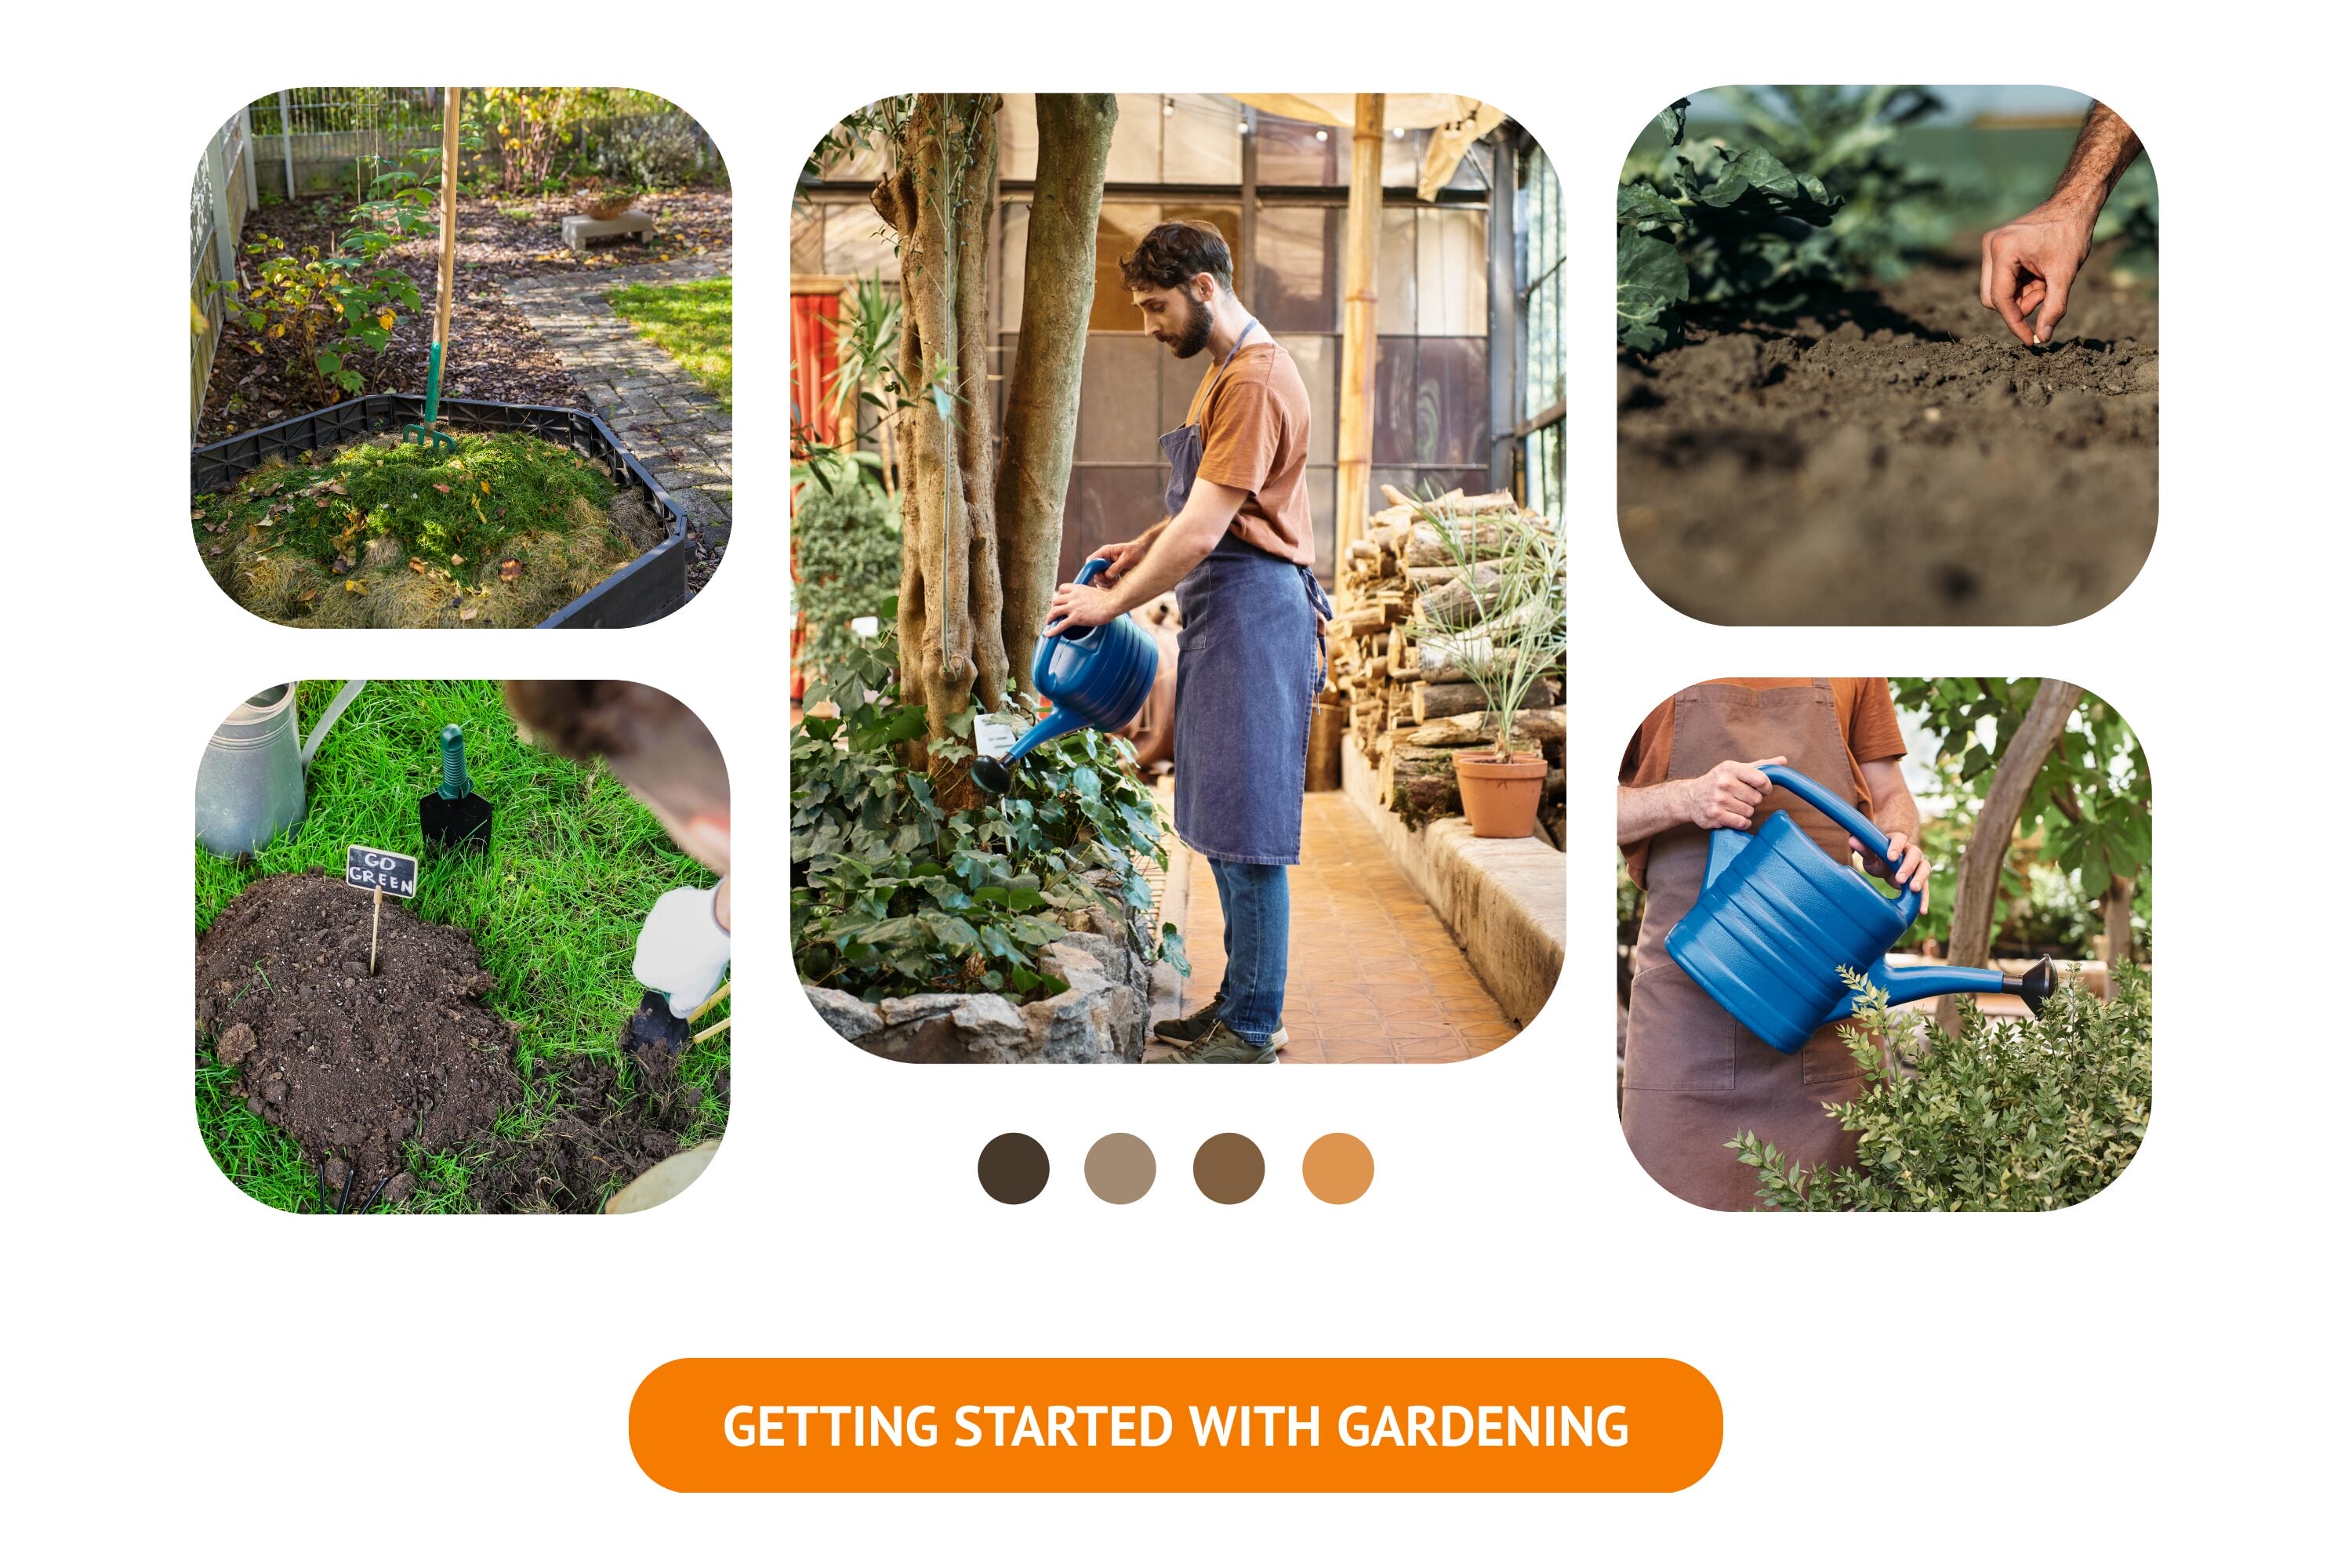 Starting with off-grid gardening.